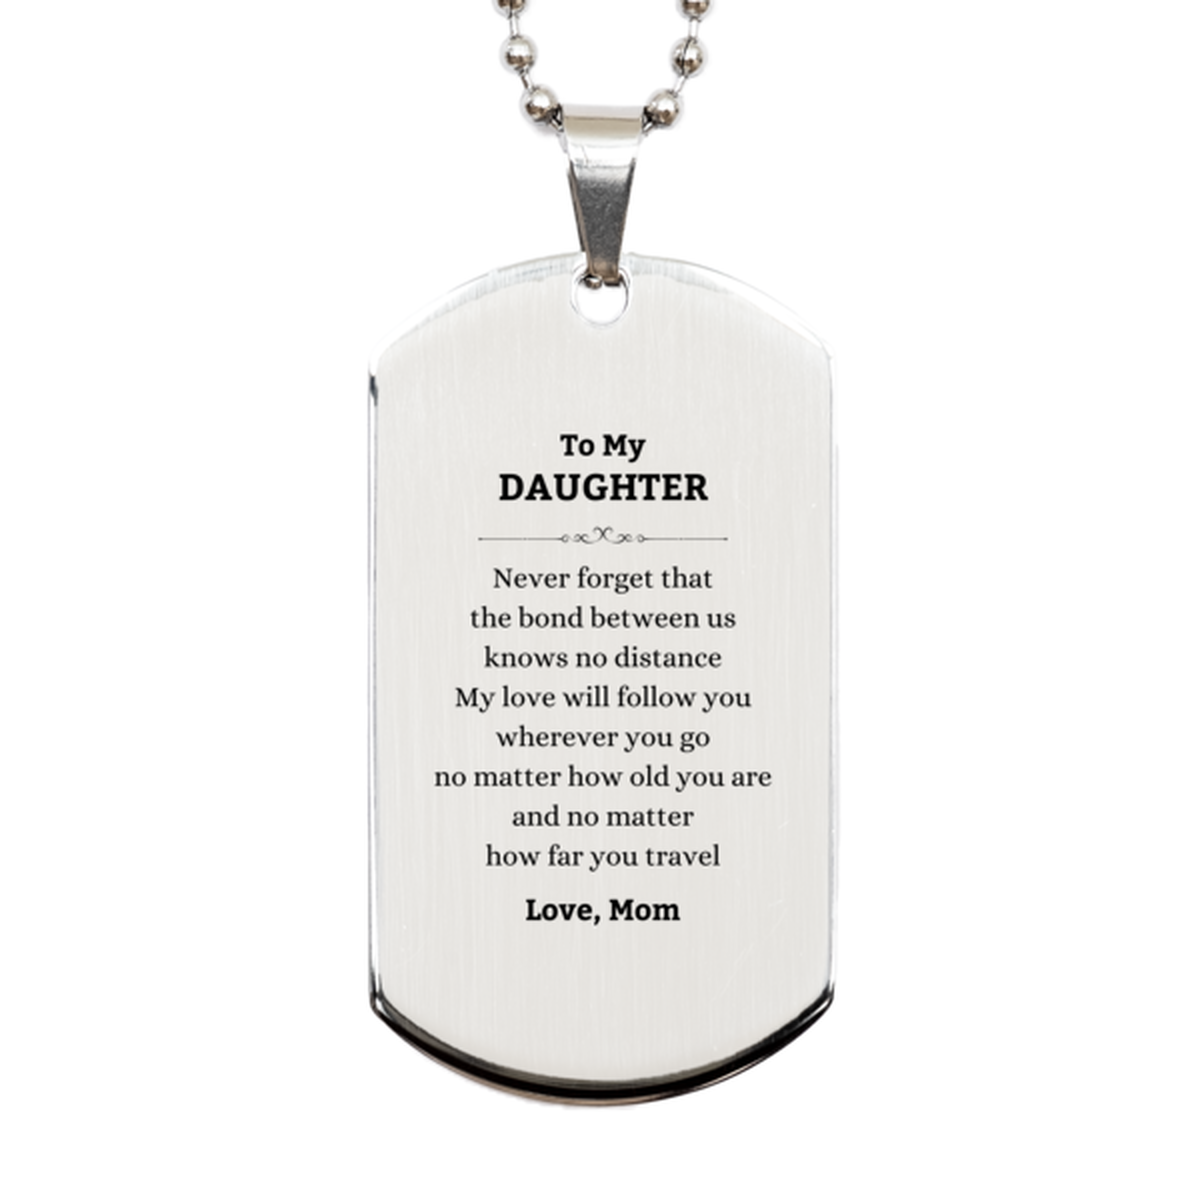 Daughter Birthday Gifts from Mom, Adjustable Silver Dog Tag for Daughter Christmas Graduation Unique Gifts Daughter Never forget that the bond between us knows no distance. Love, Mom